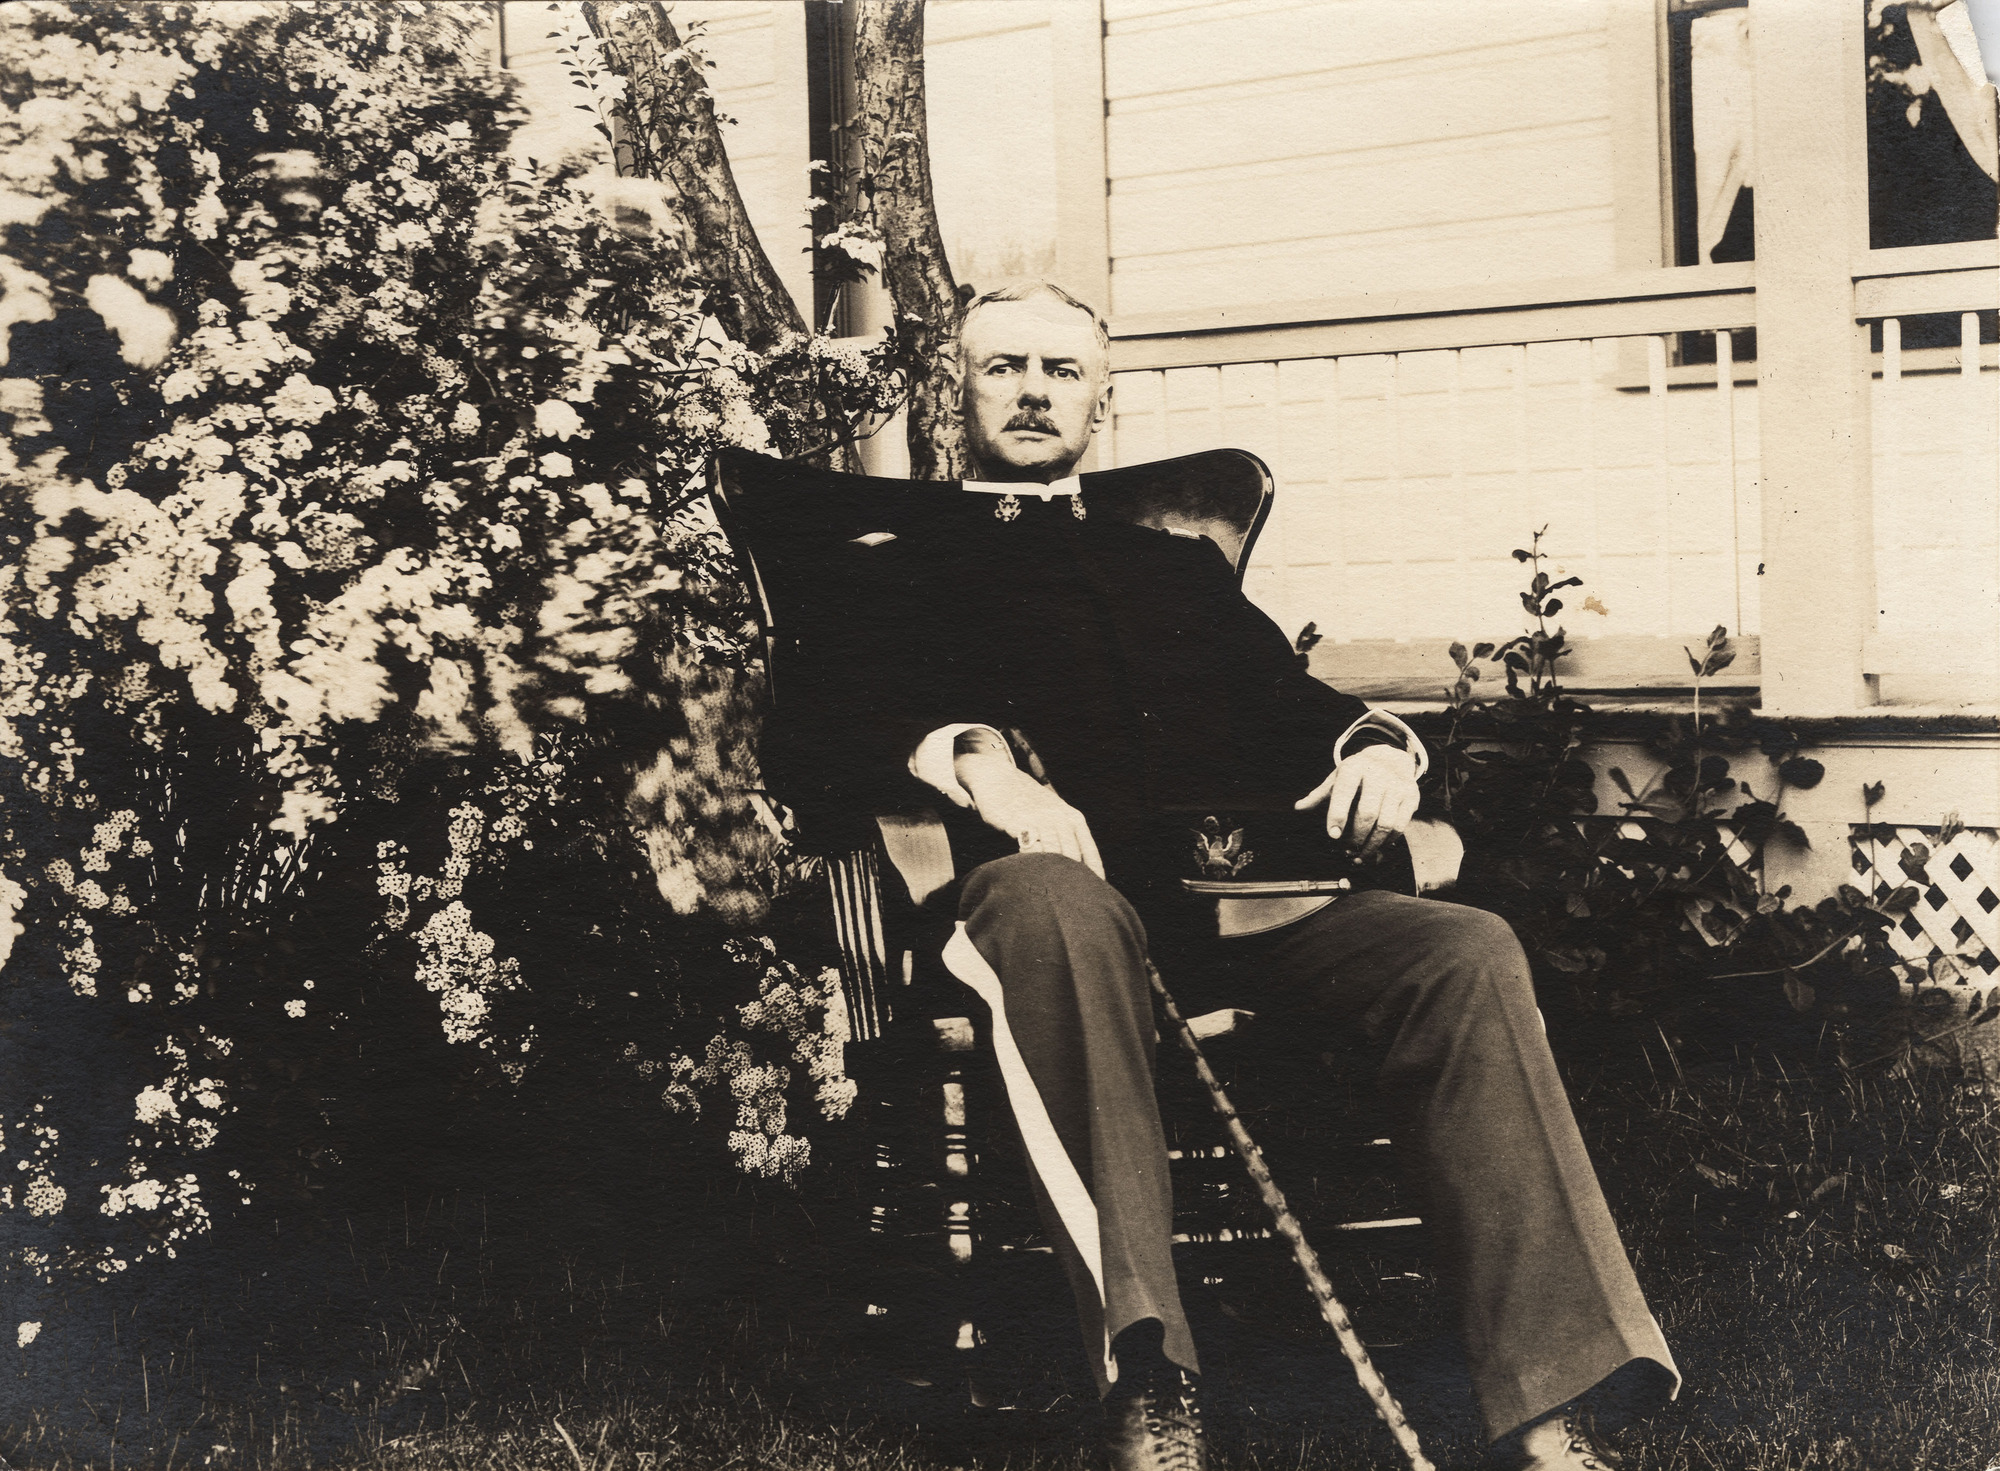 Black and white photograph of a man in a uniform sitting in a chair in yard by a house